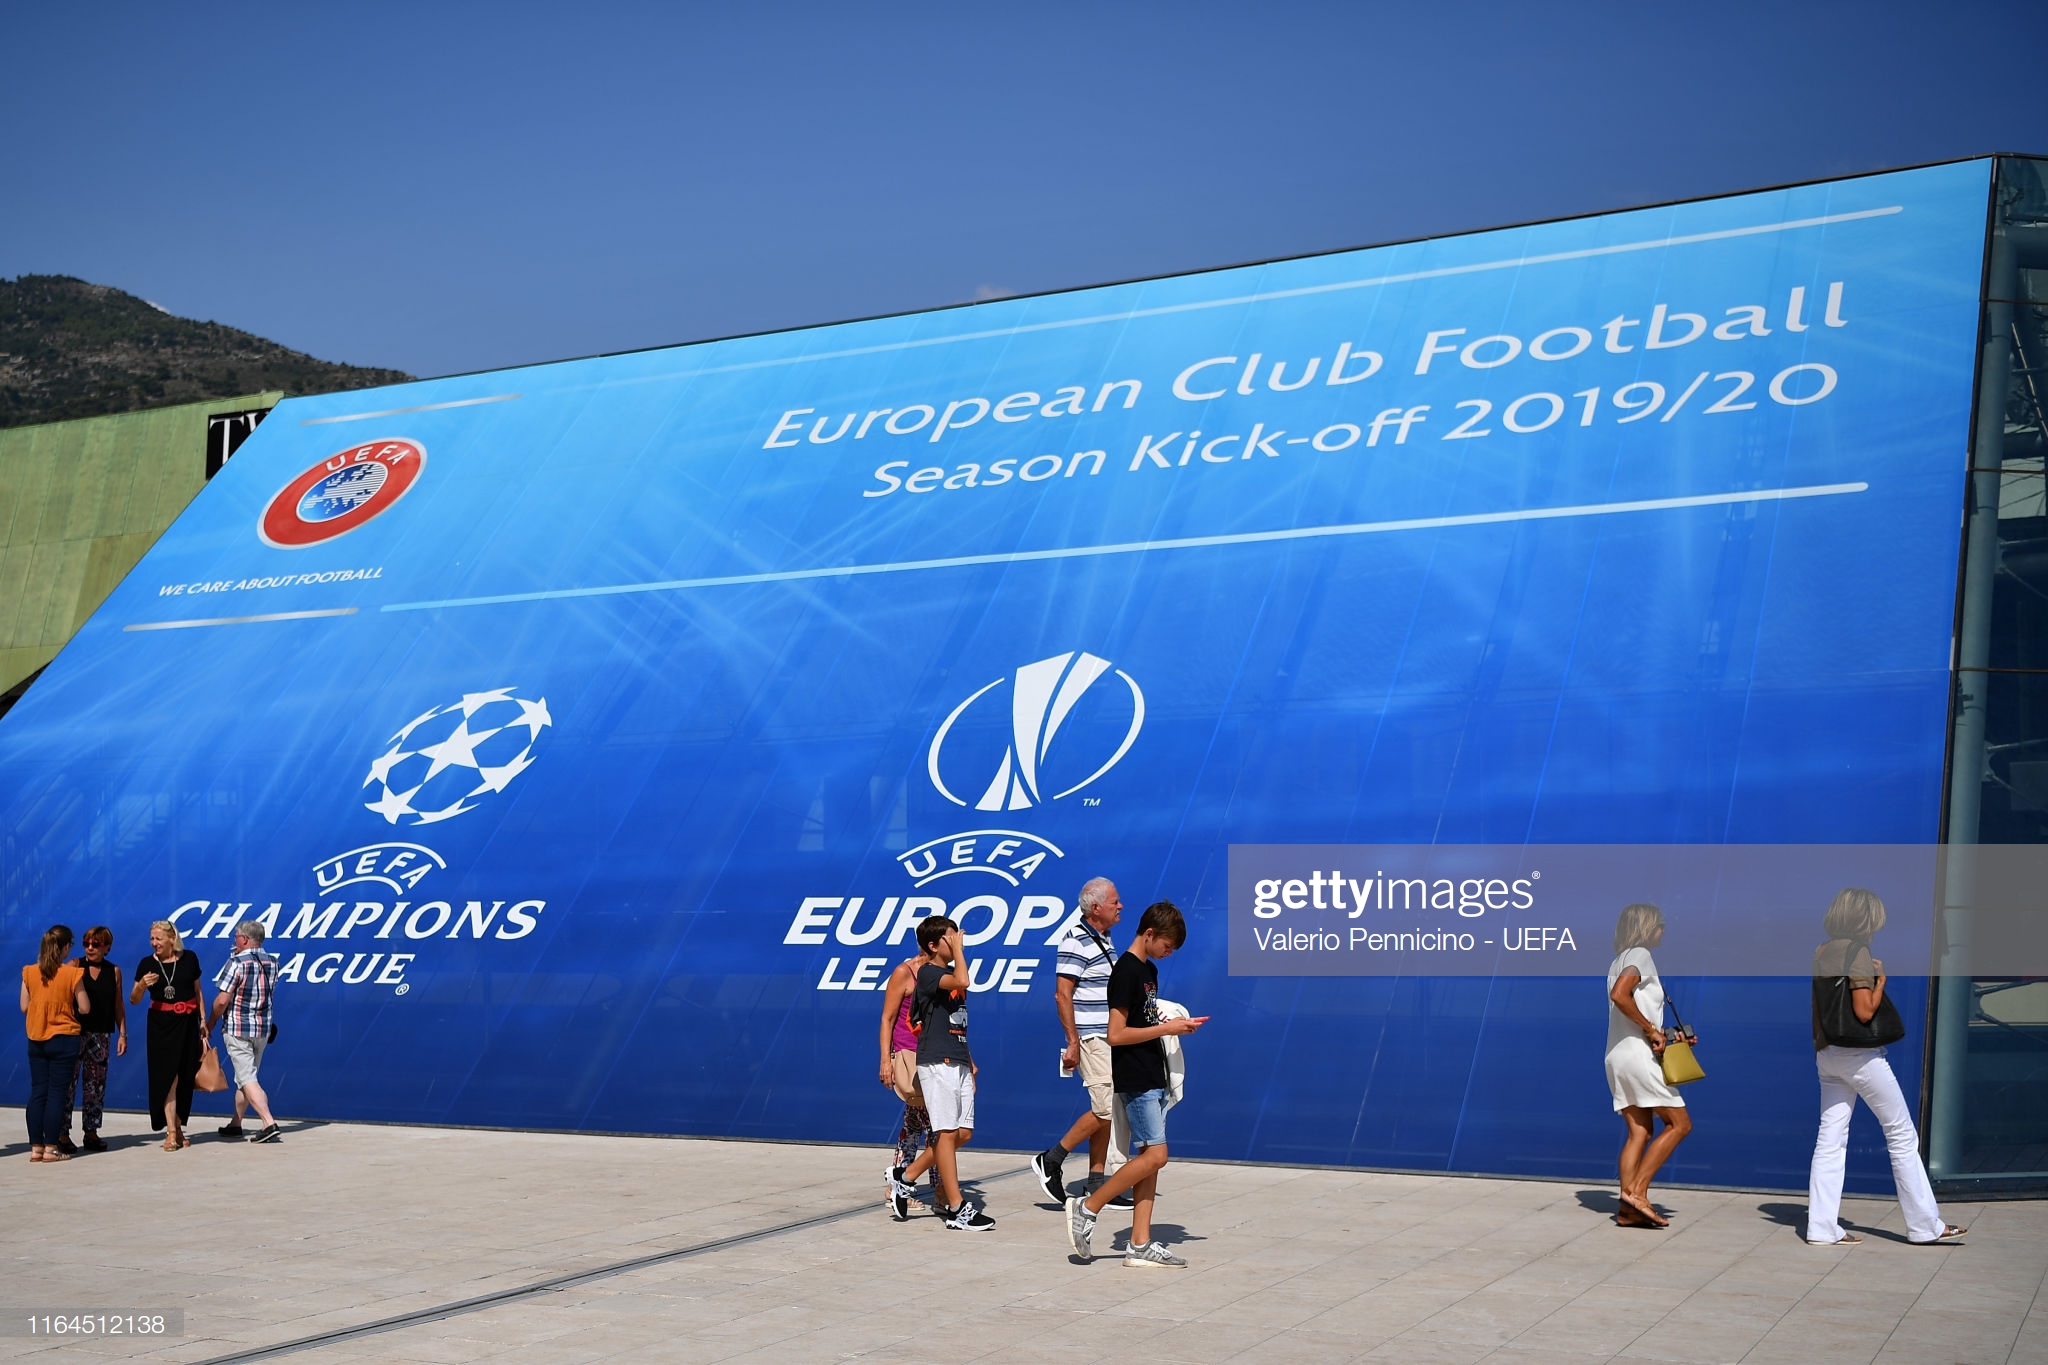 gettyimages-1164512138-2048x2048.jpg